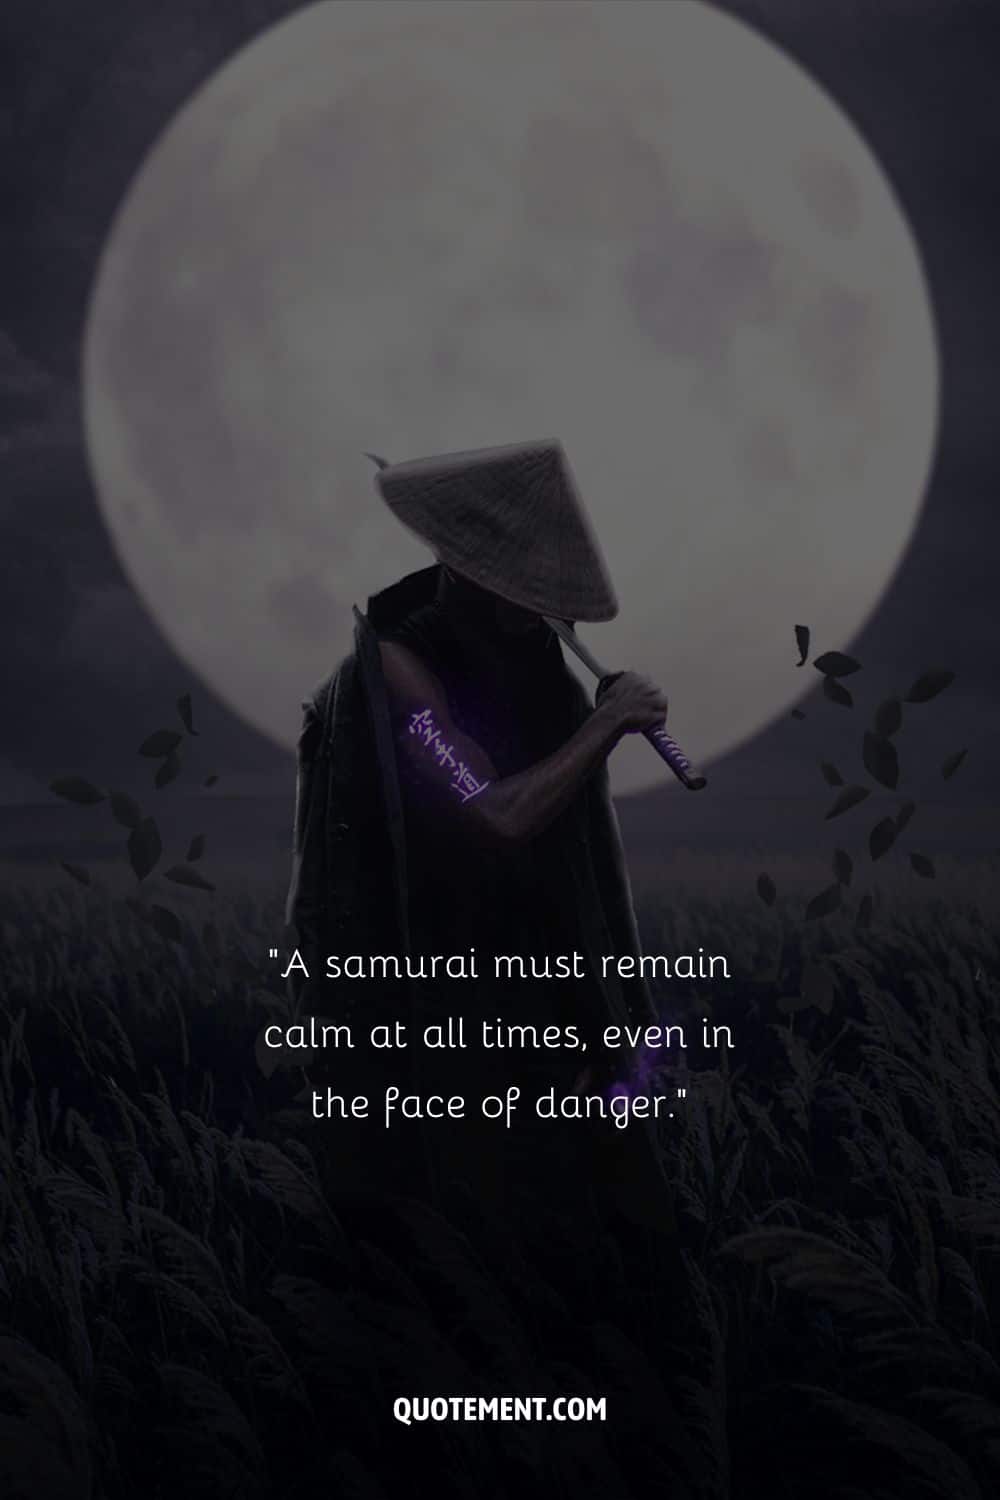 Timeless Samurai Quotes to Live By